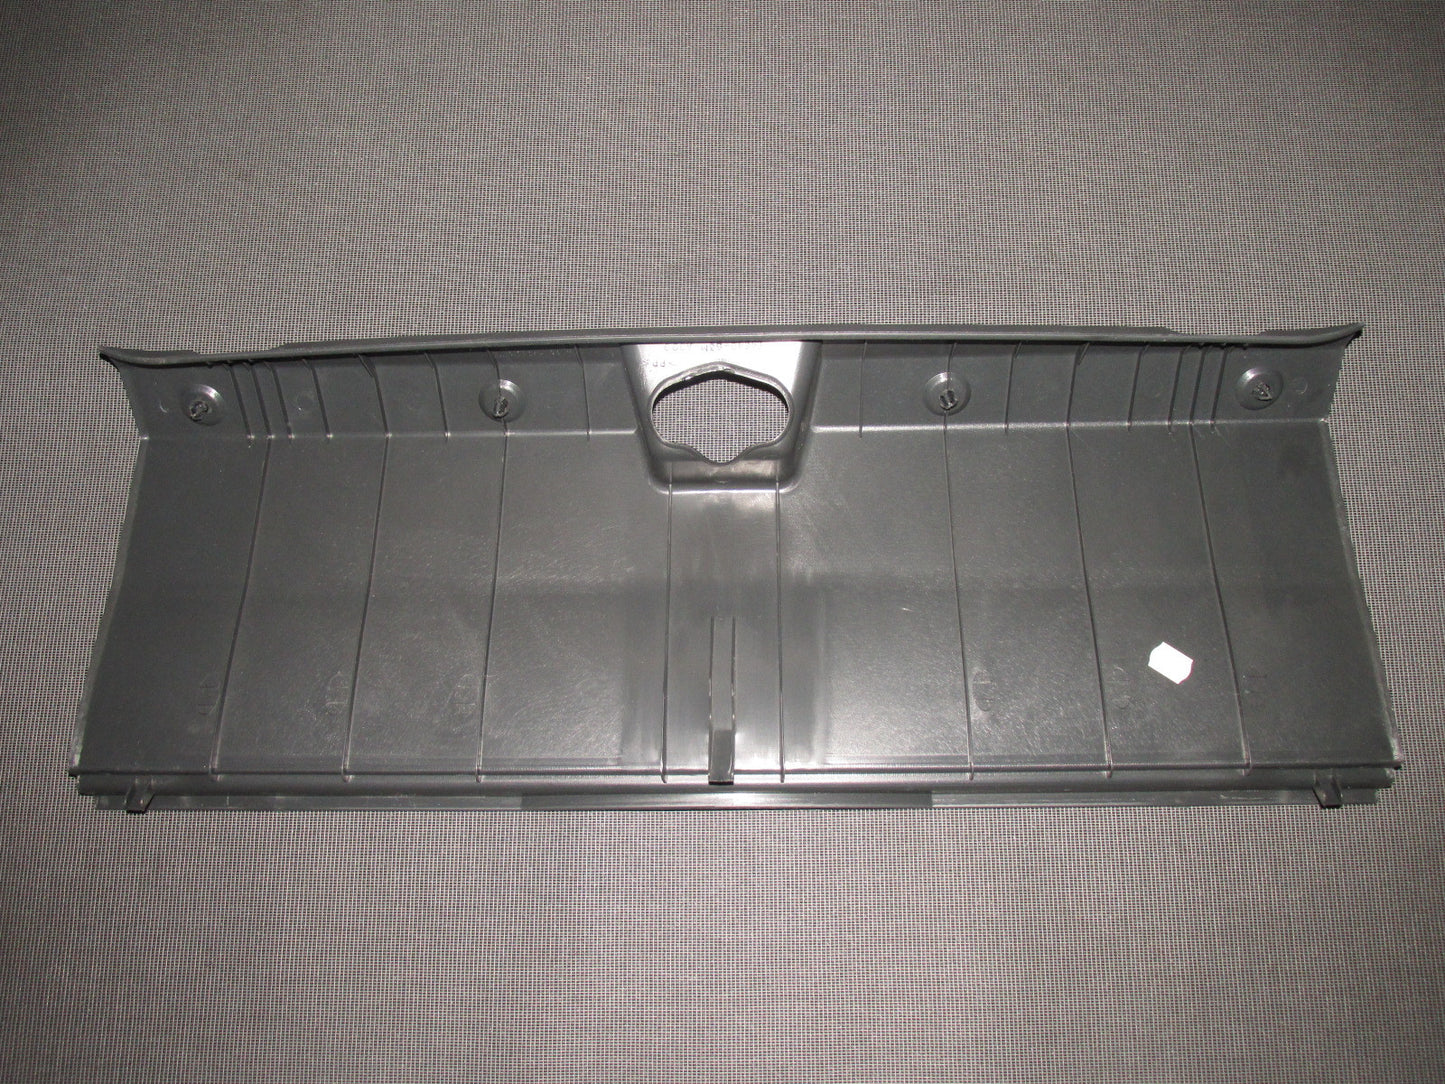 01 02 03 Acura CL OEM Type-S J32A2 Trunk Panel Cover